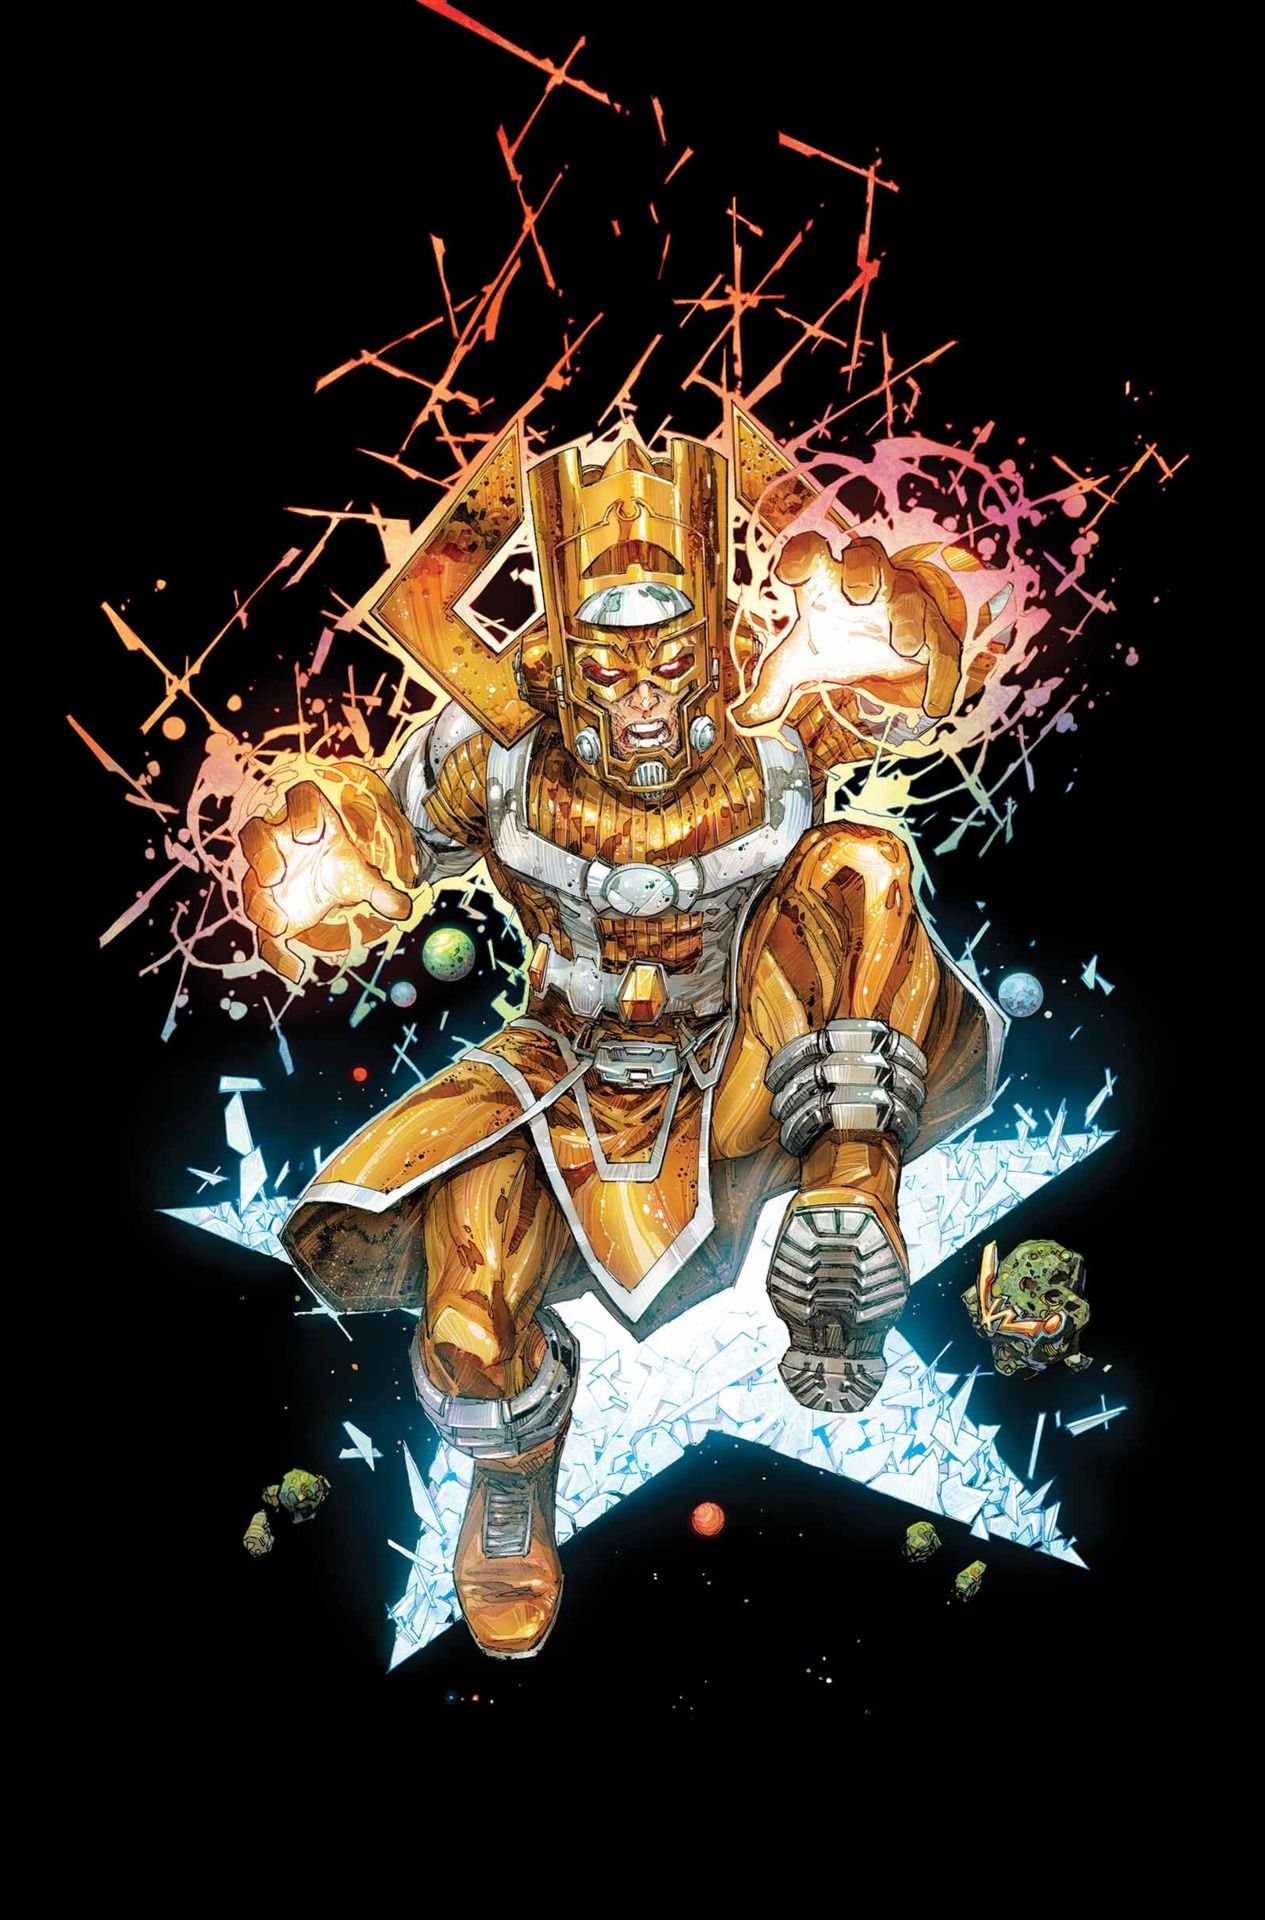 Can someone make this image of Galactus, Lifebringer, into a.